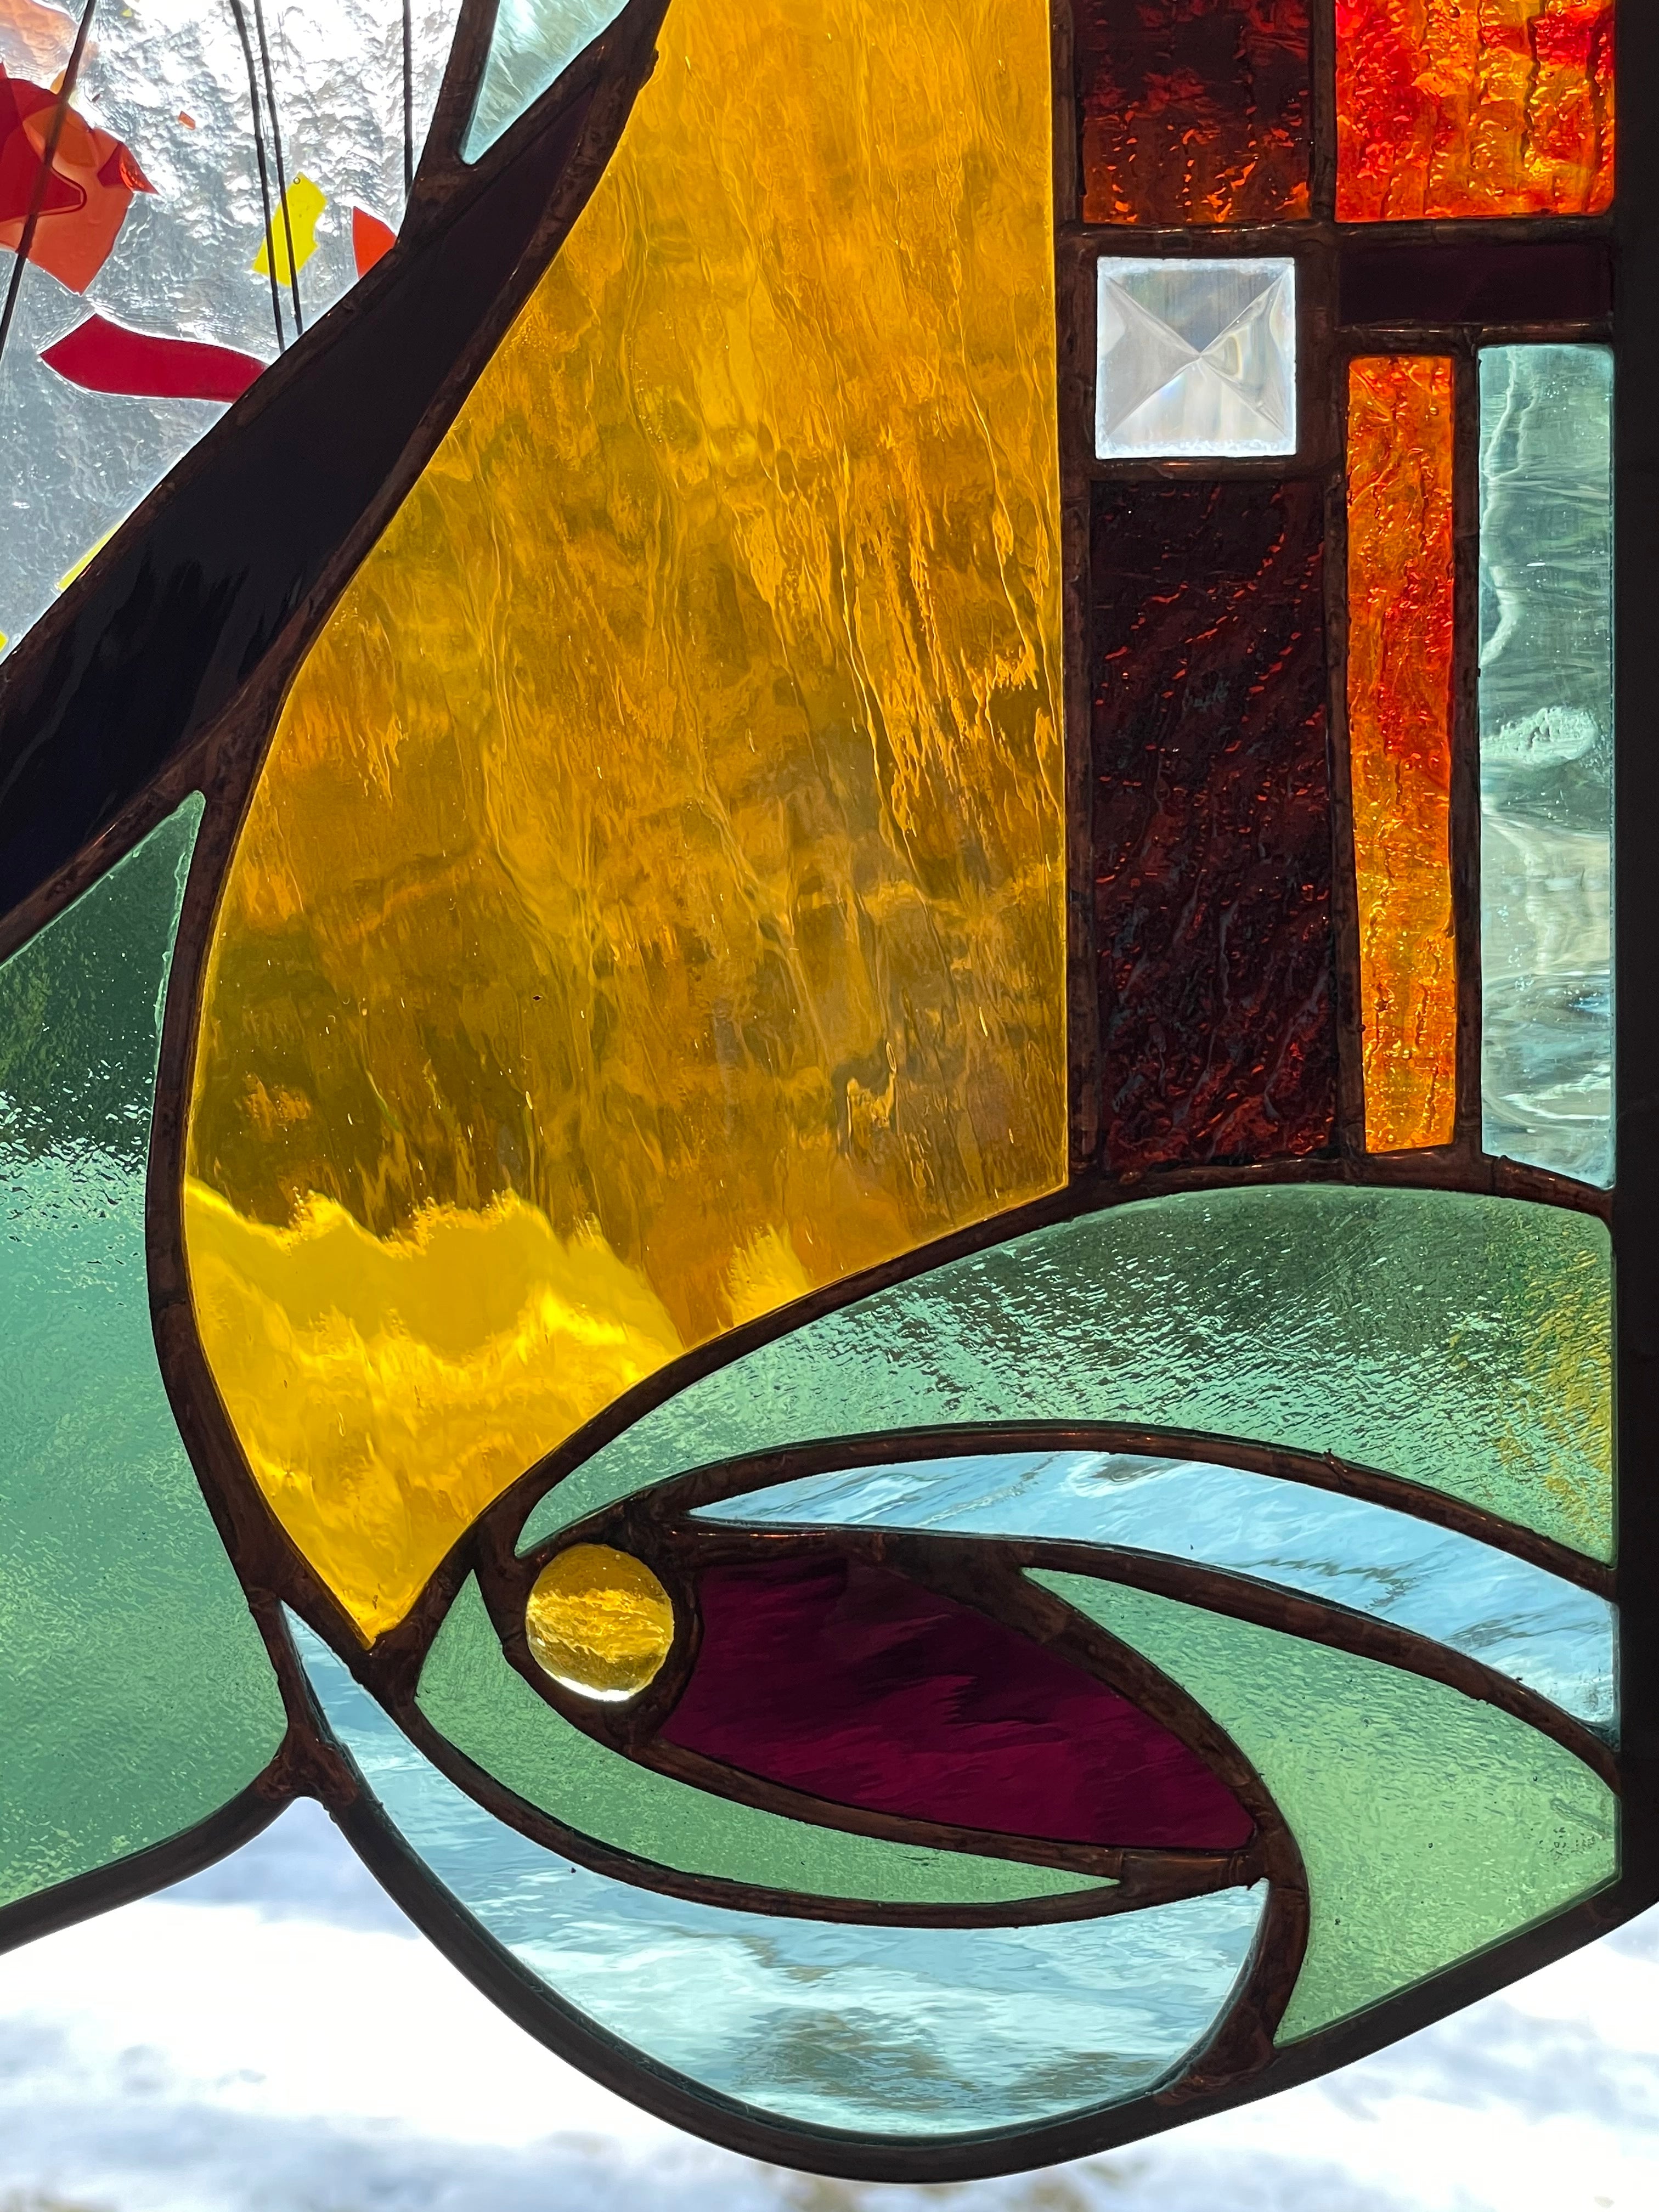 Large stained glass panel with Autumn colors and organic swirls made by Vermont artist Julia Brandis.